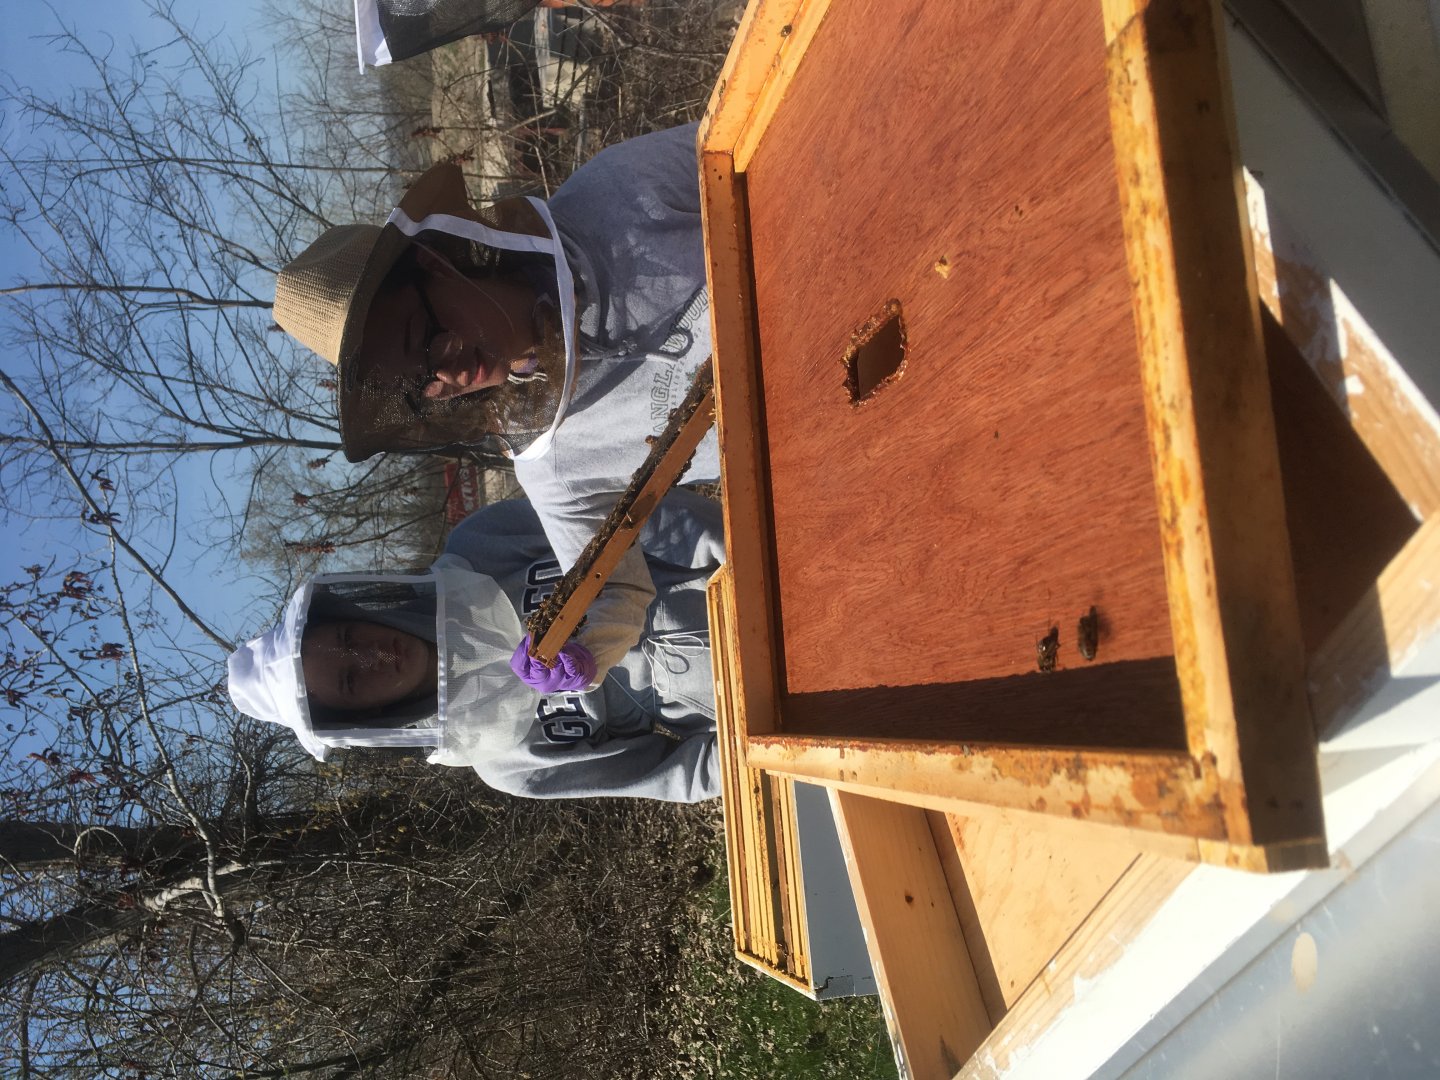 Two beekeepers inspecting a hive frame